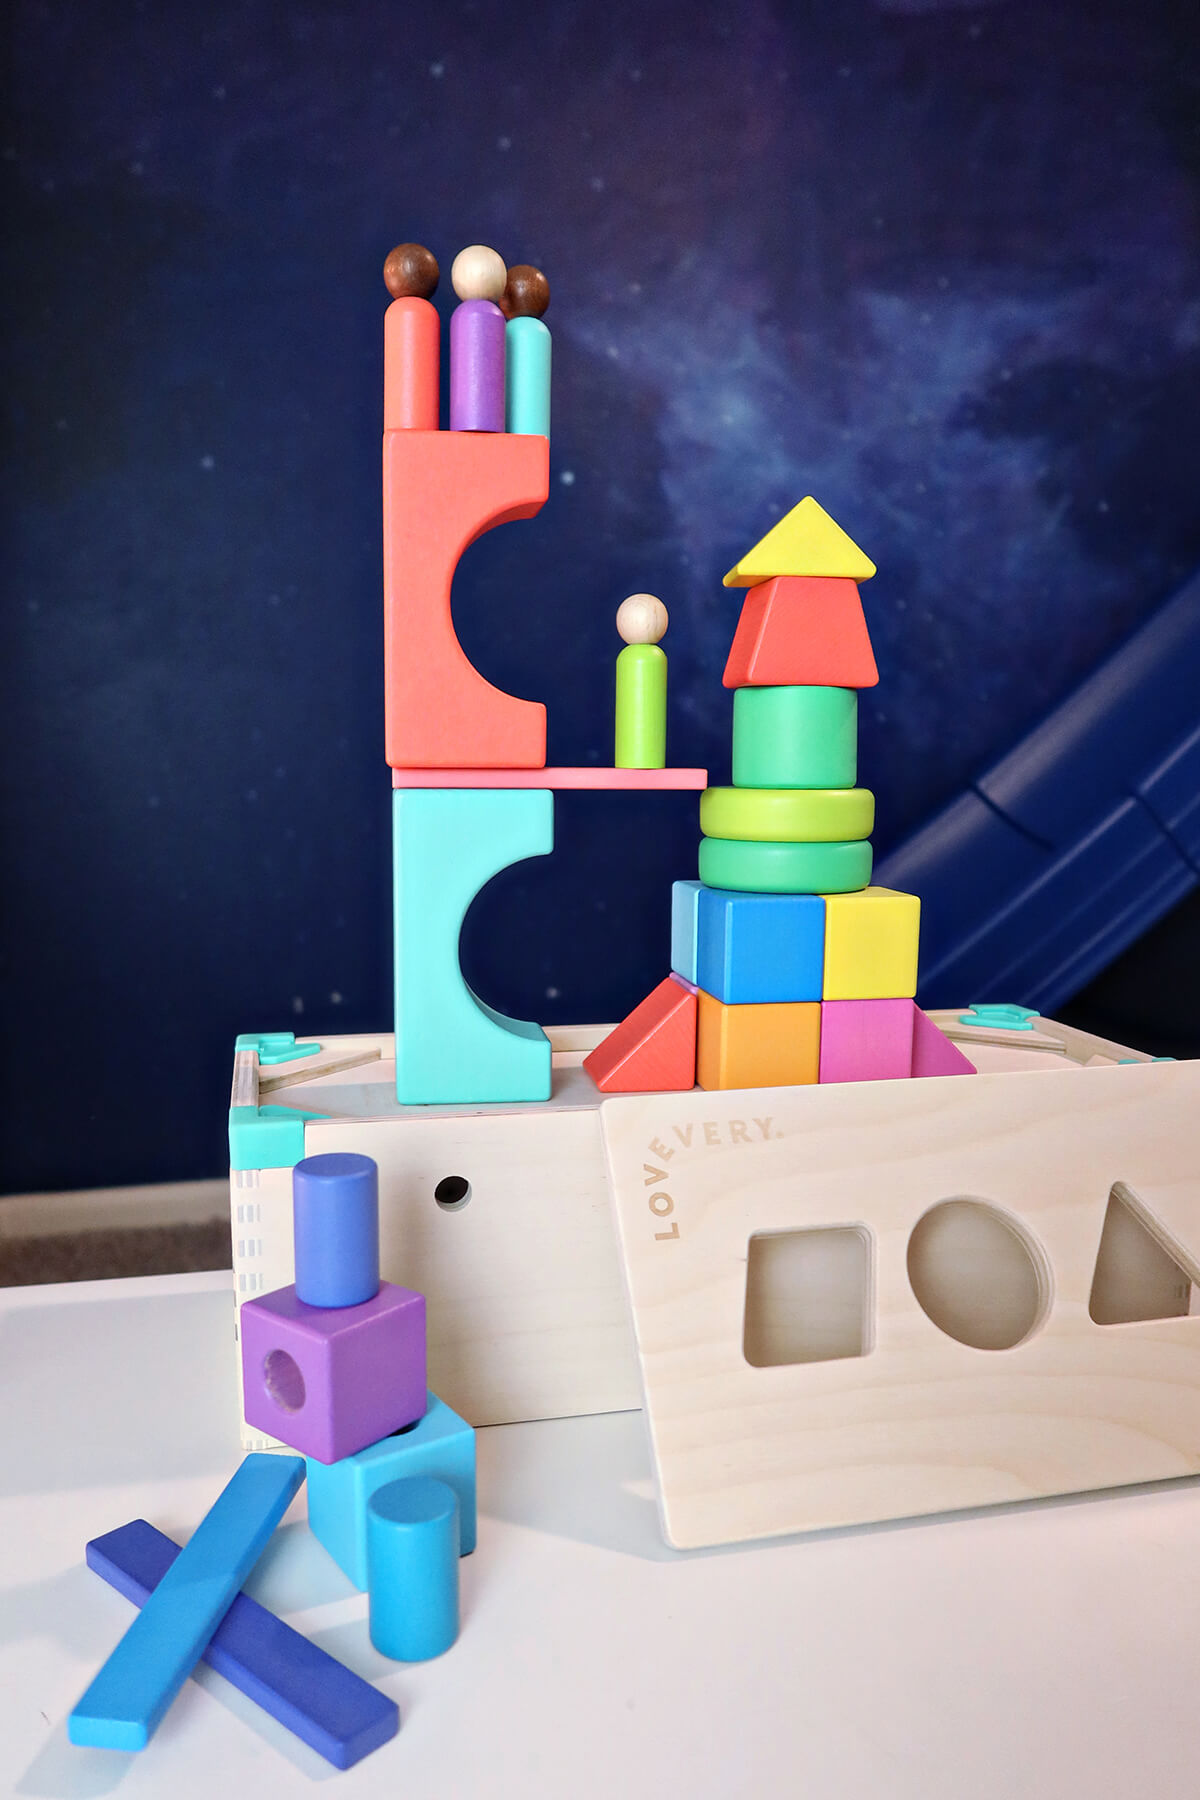 Lovevery Play Kits Review: Stage-Based Play for Your Child's